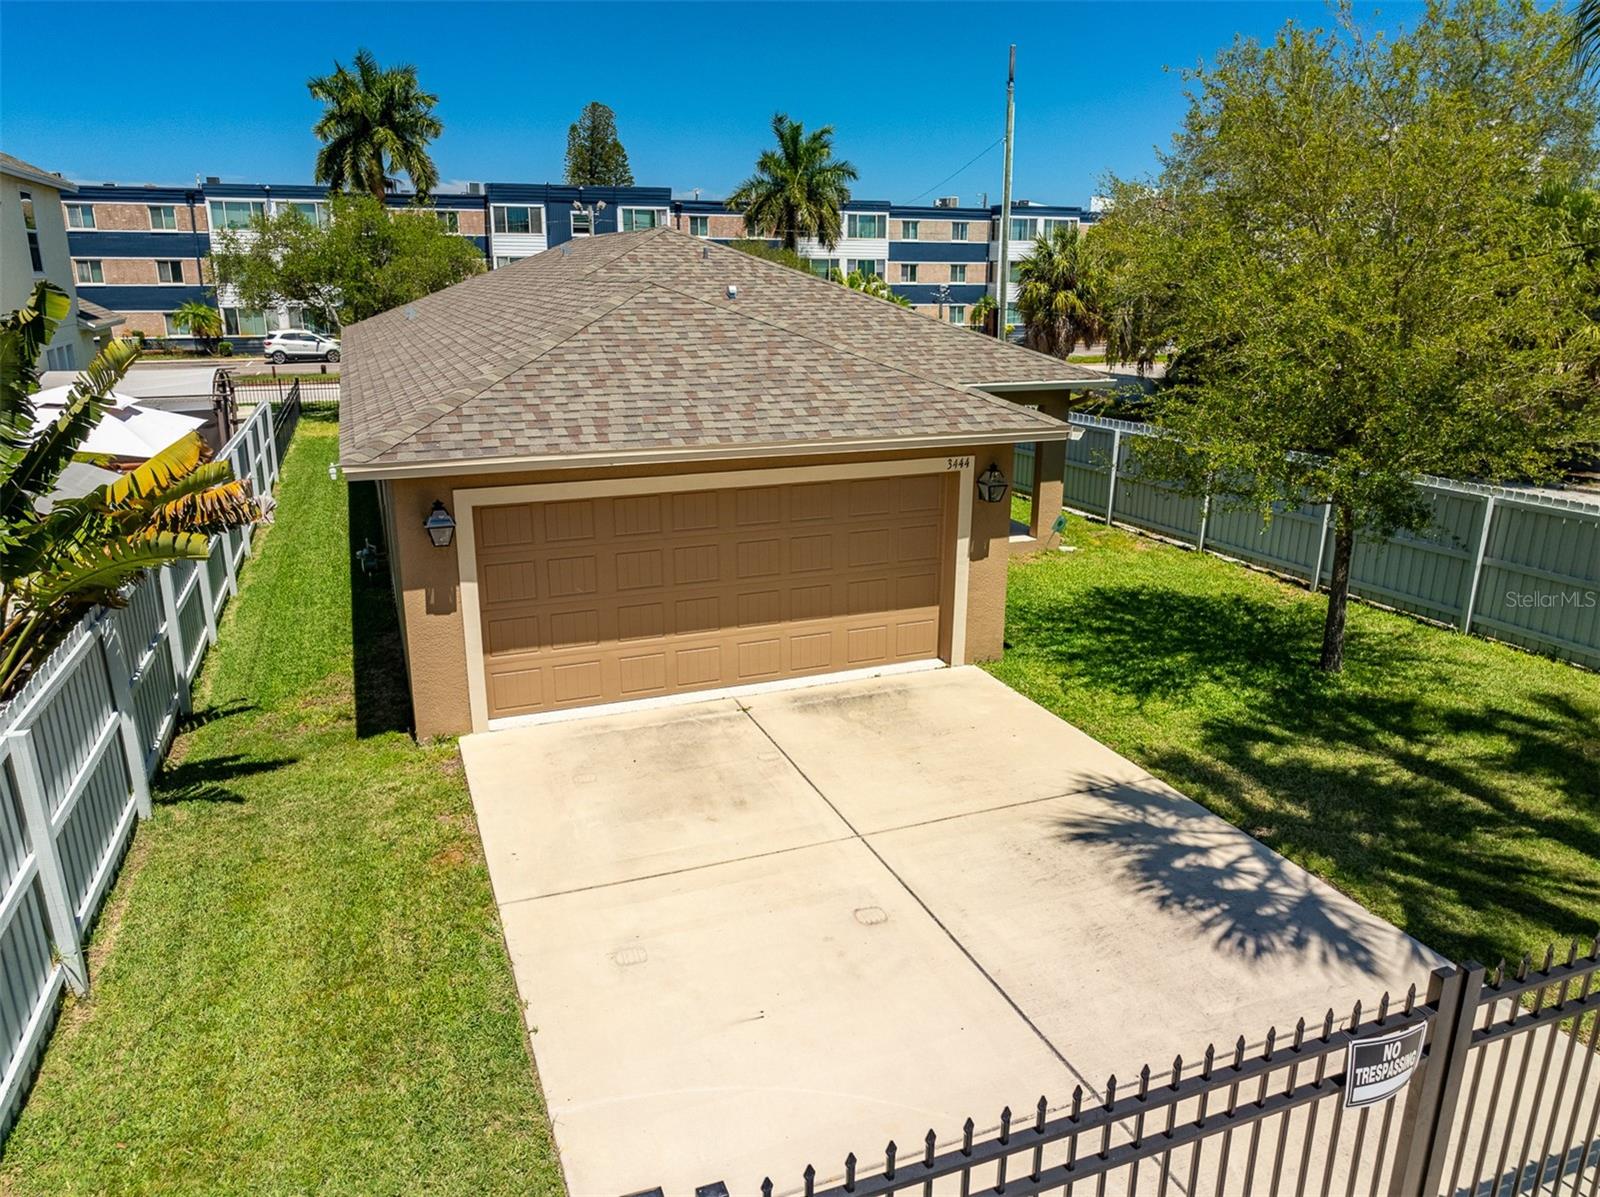 Spacious 2-car garage with gated access and 4 car parking pad accessible from rear alley